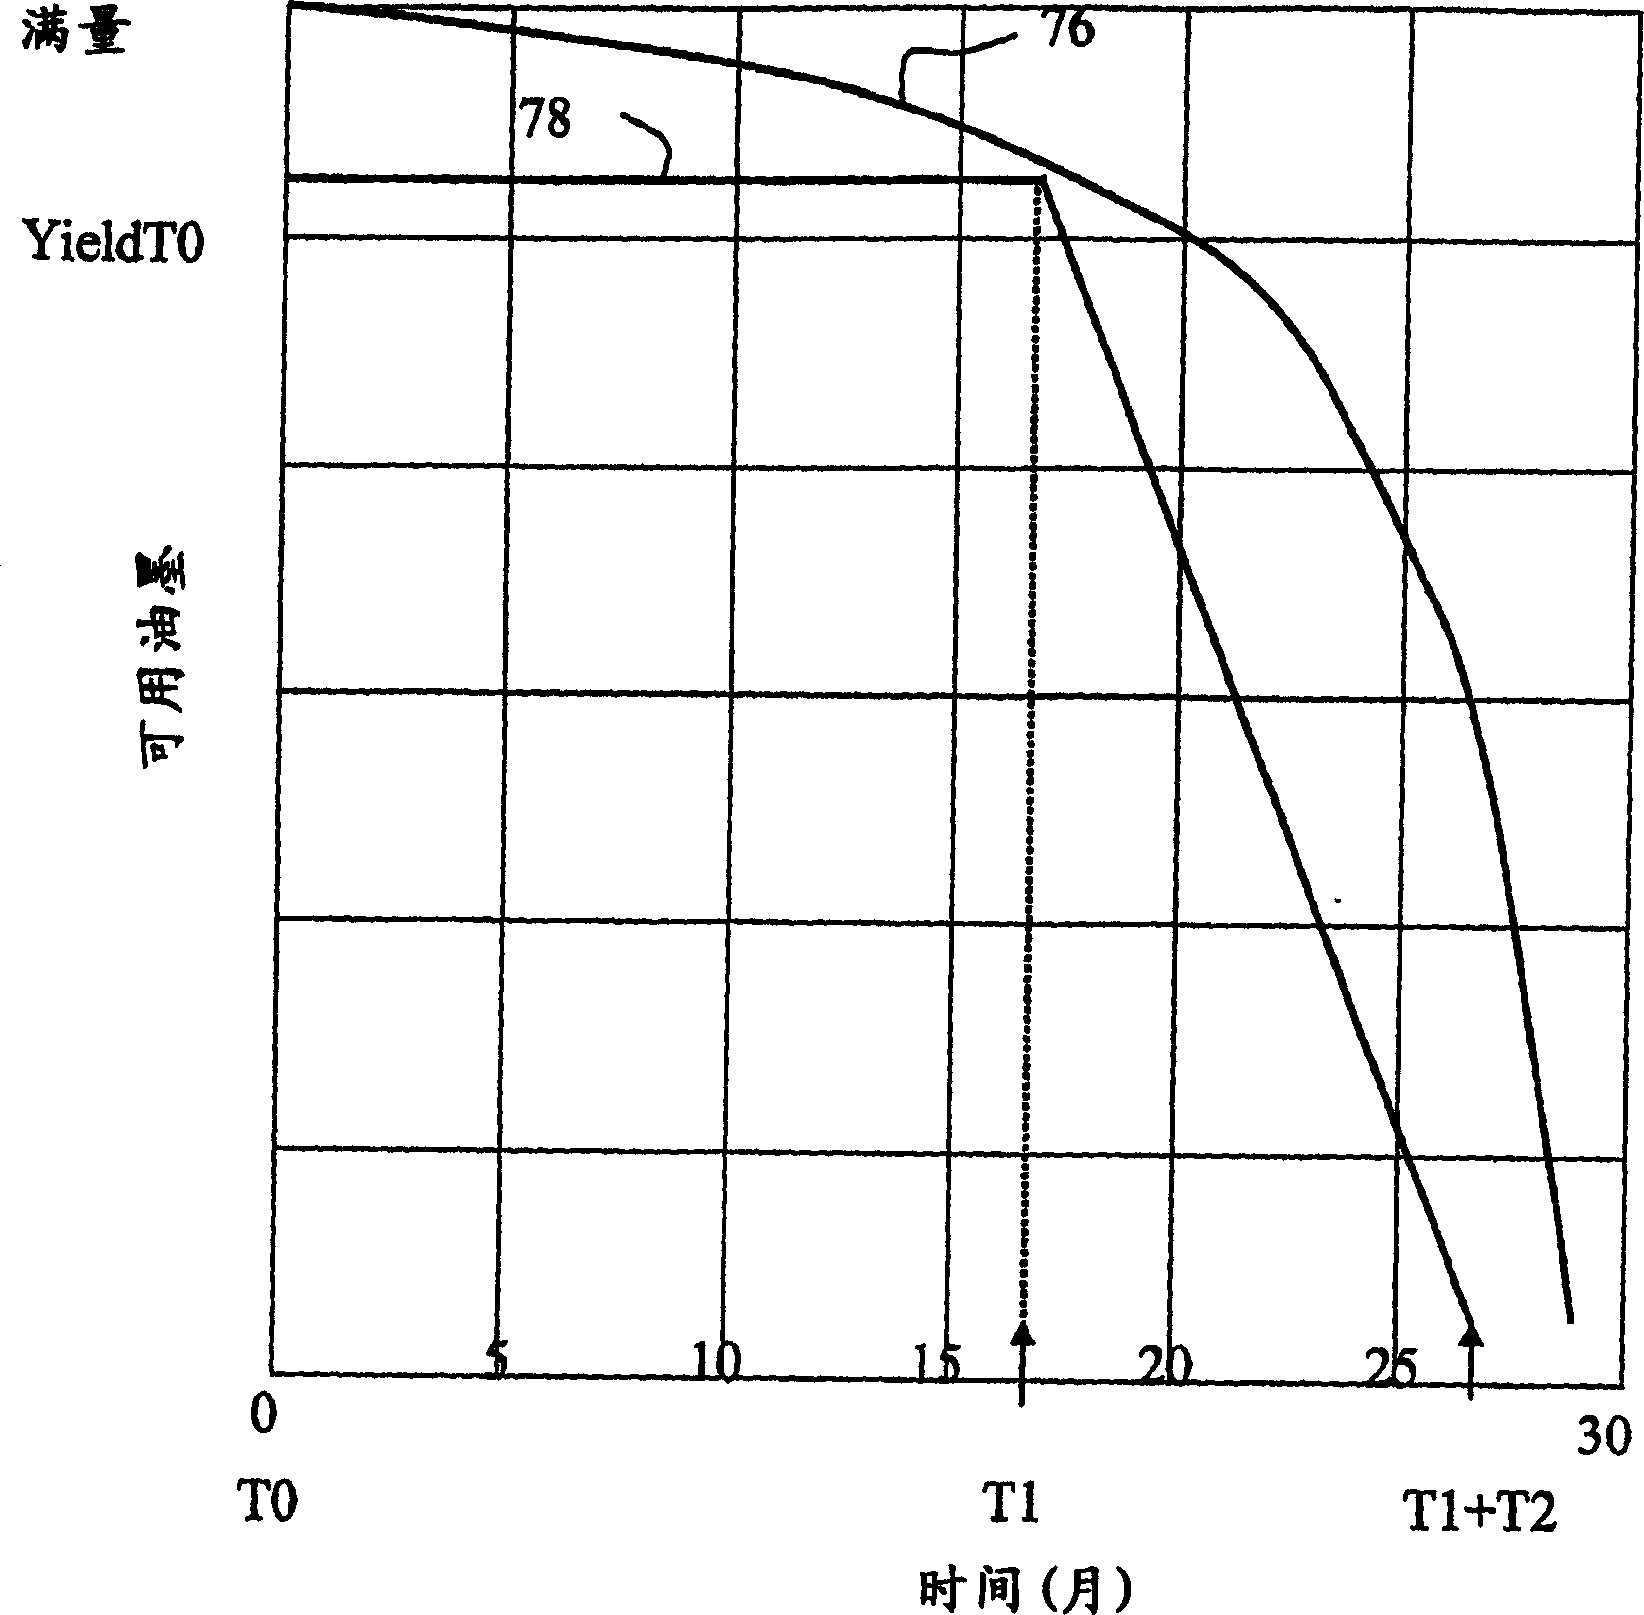 Method of estimating an amount of available ink contained in an ink reservoir